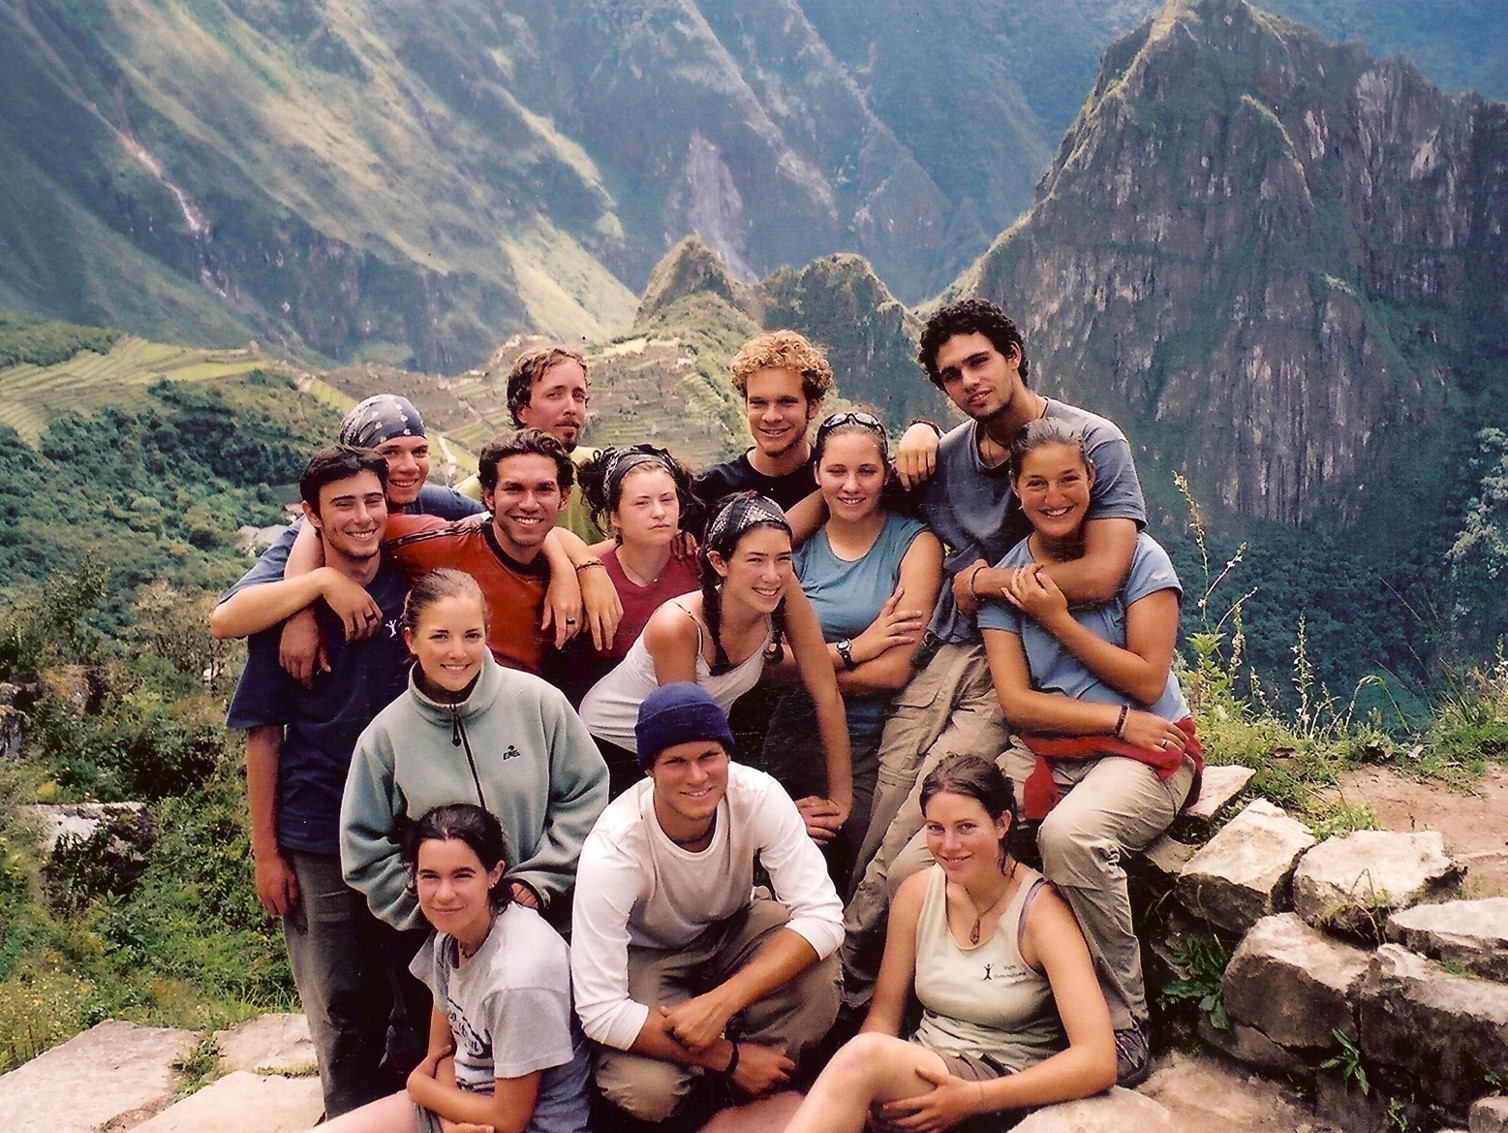 A group of fourteen men and women posing in front of a mountainous landscape